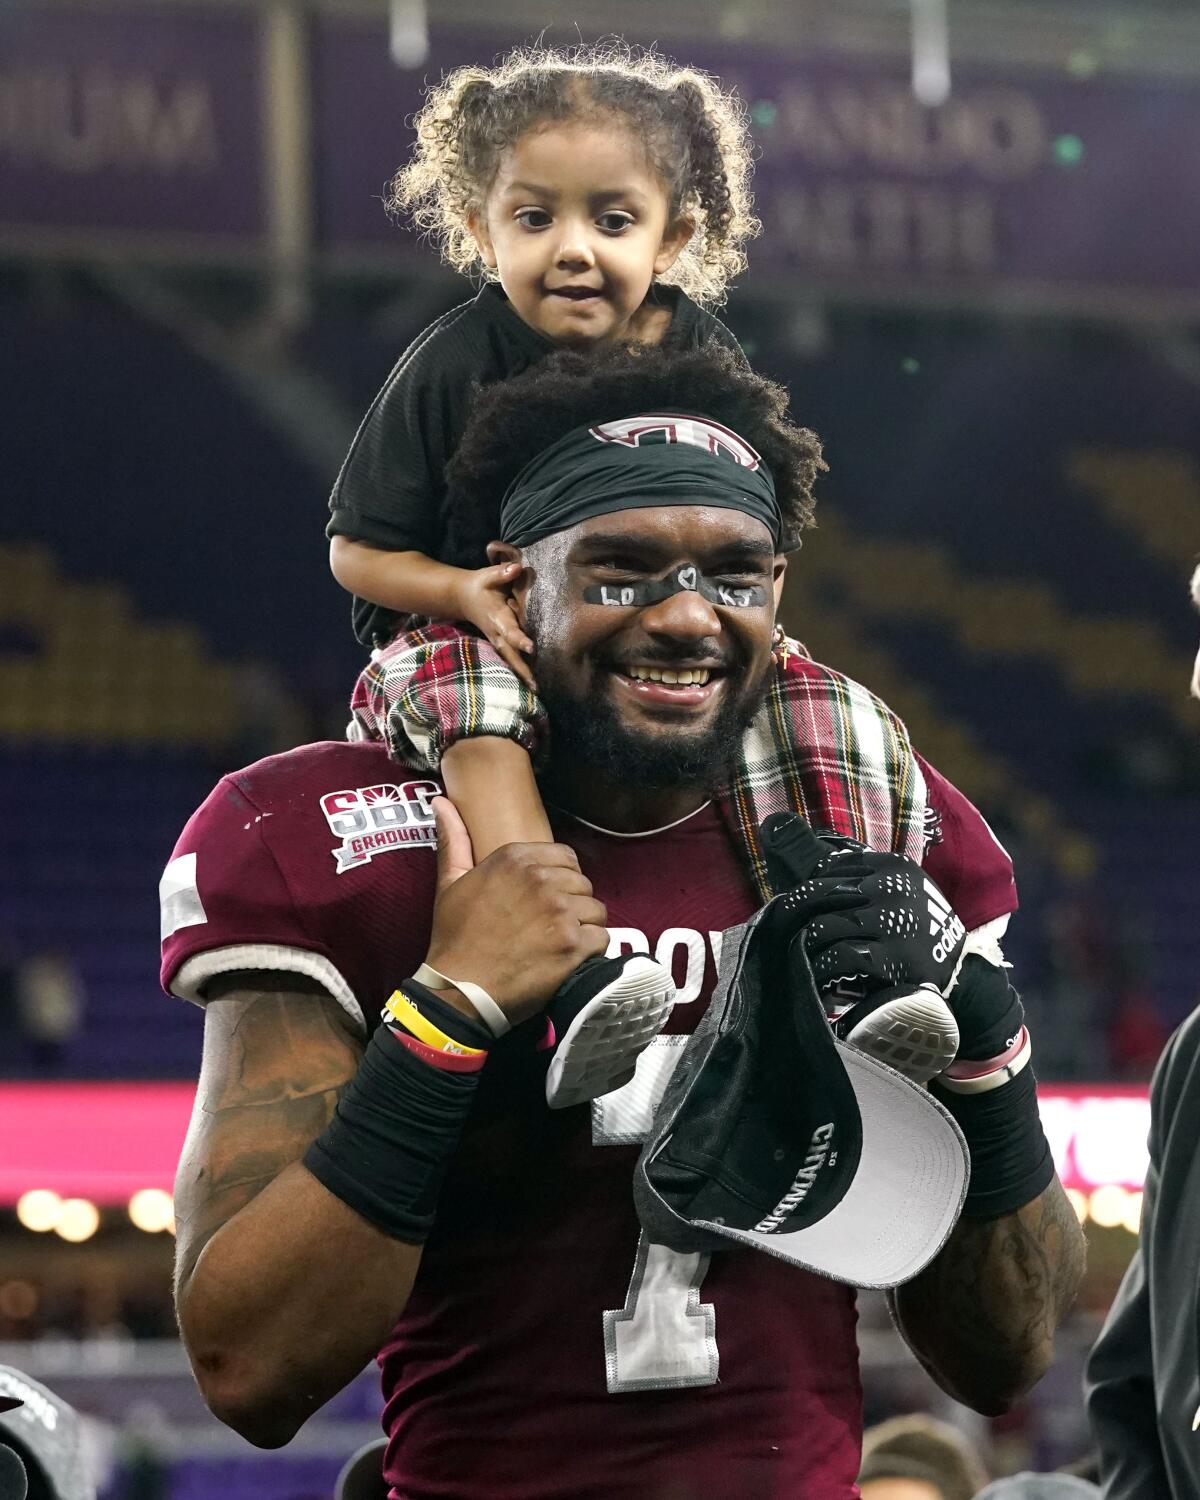 Troy linebacker K.J. Robertson hoists his daughter Layla, 2, after he was named MVP of the Cure Bowl.